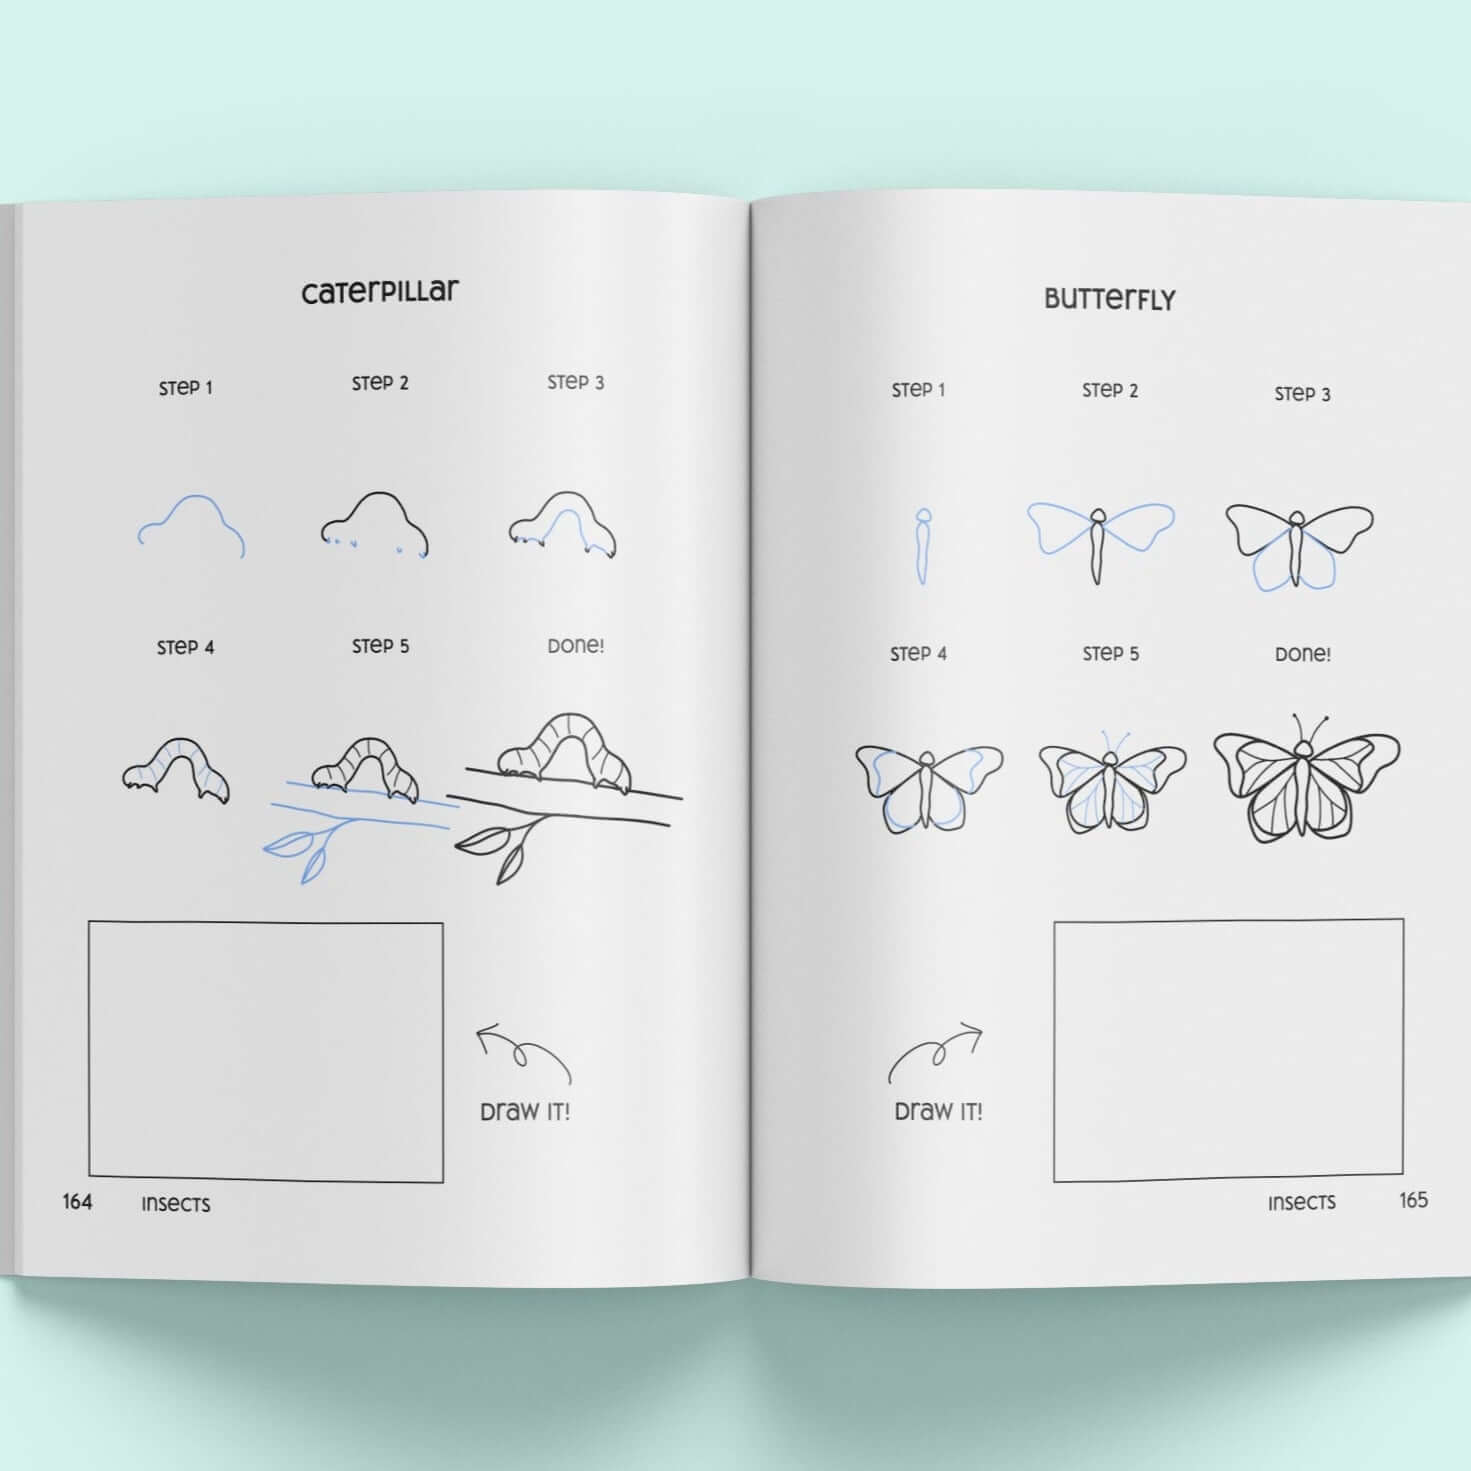 How to draw a line art butterfly